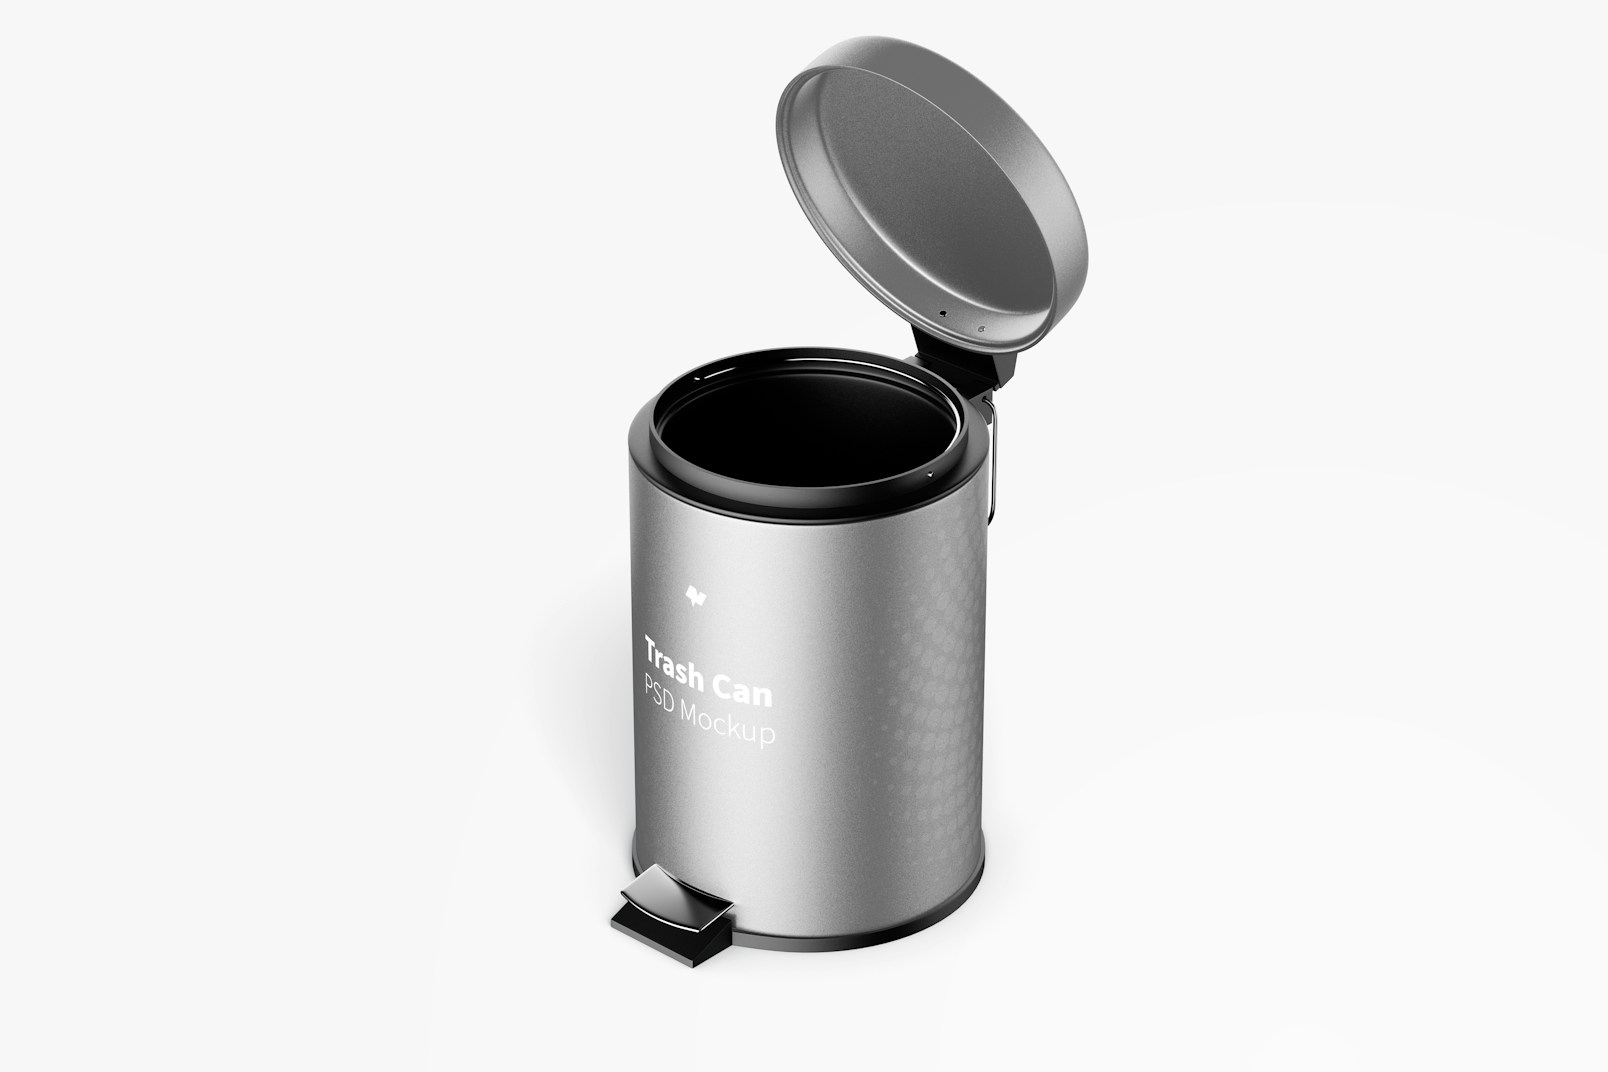 Trash Can With Foot Pedal Mockup